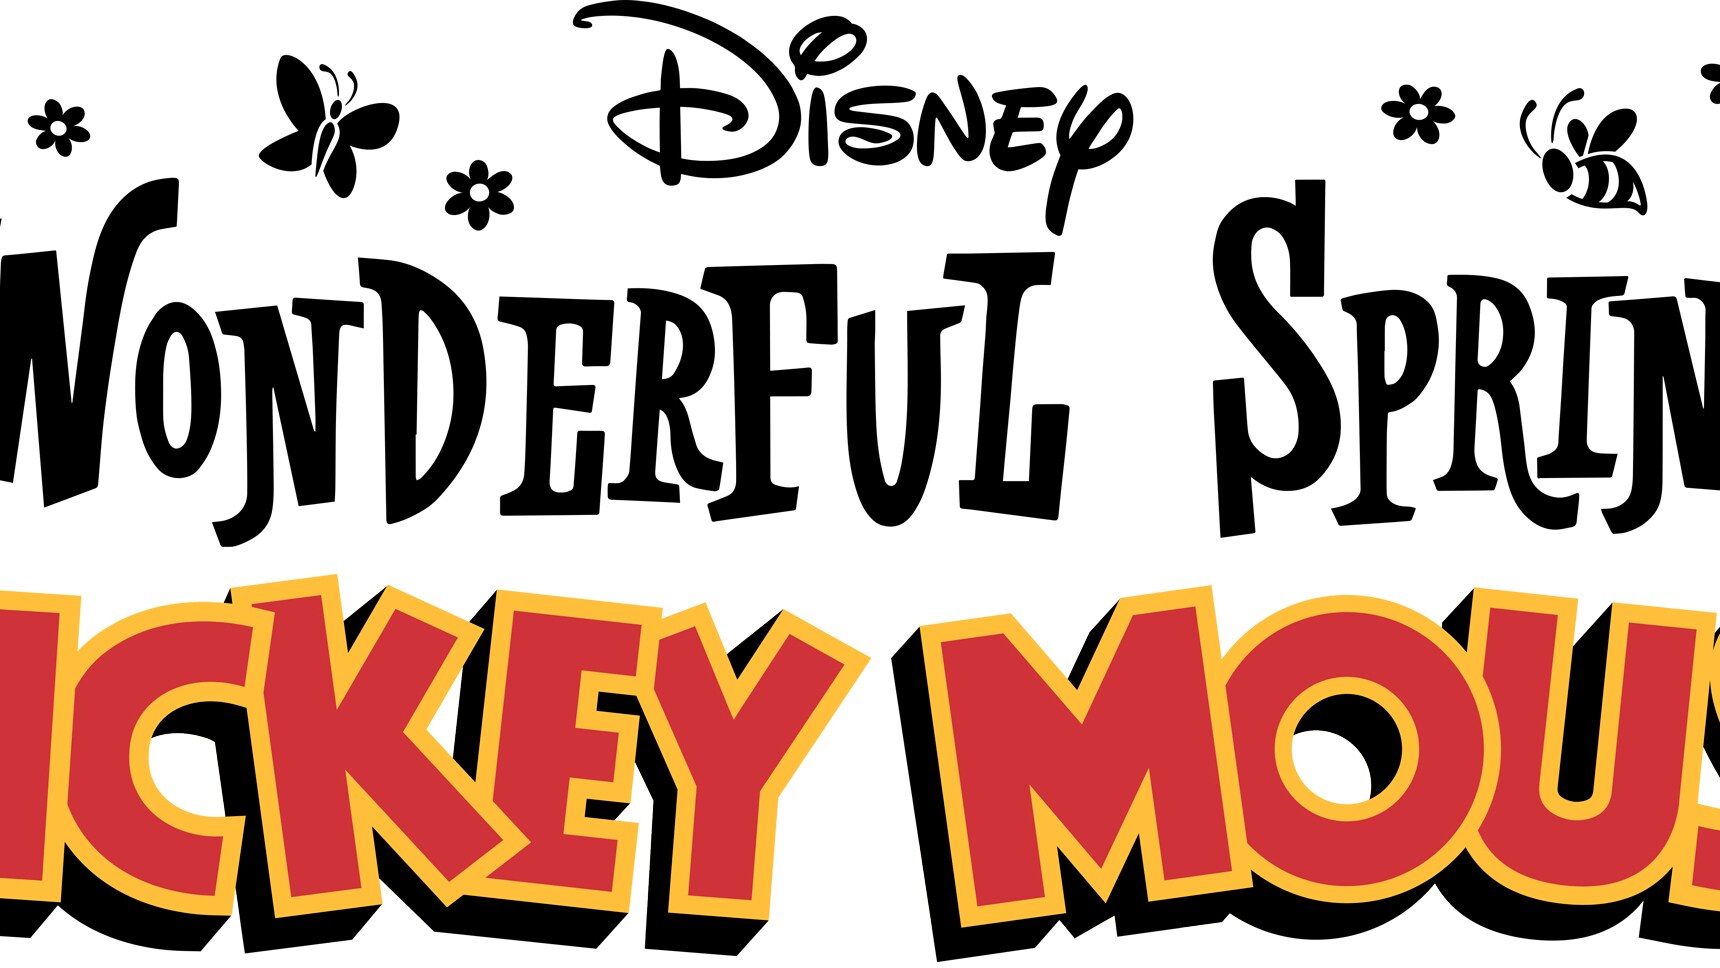 The Wonderful Spring of Mickey Mouse Logo